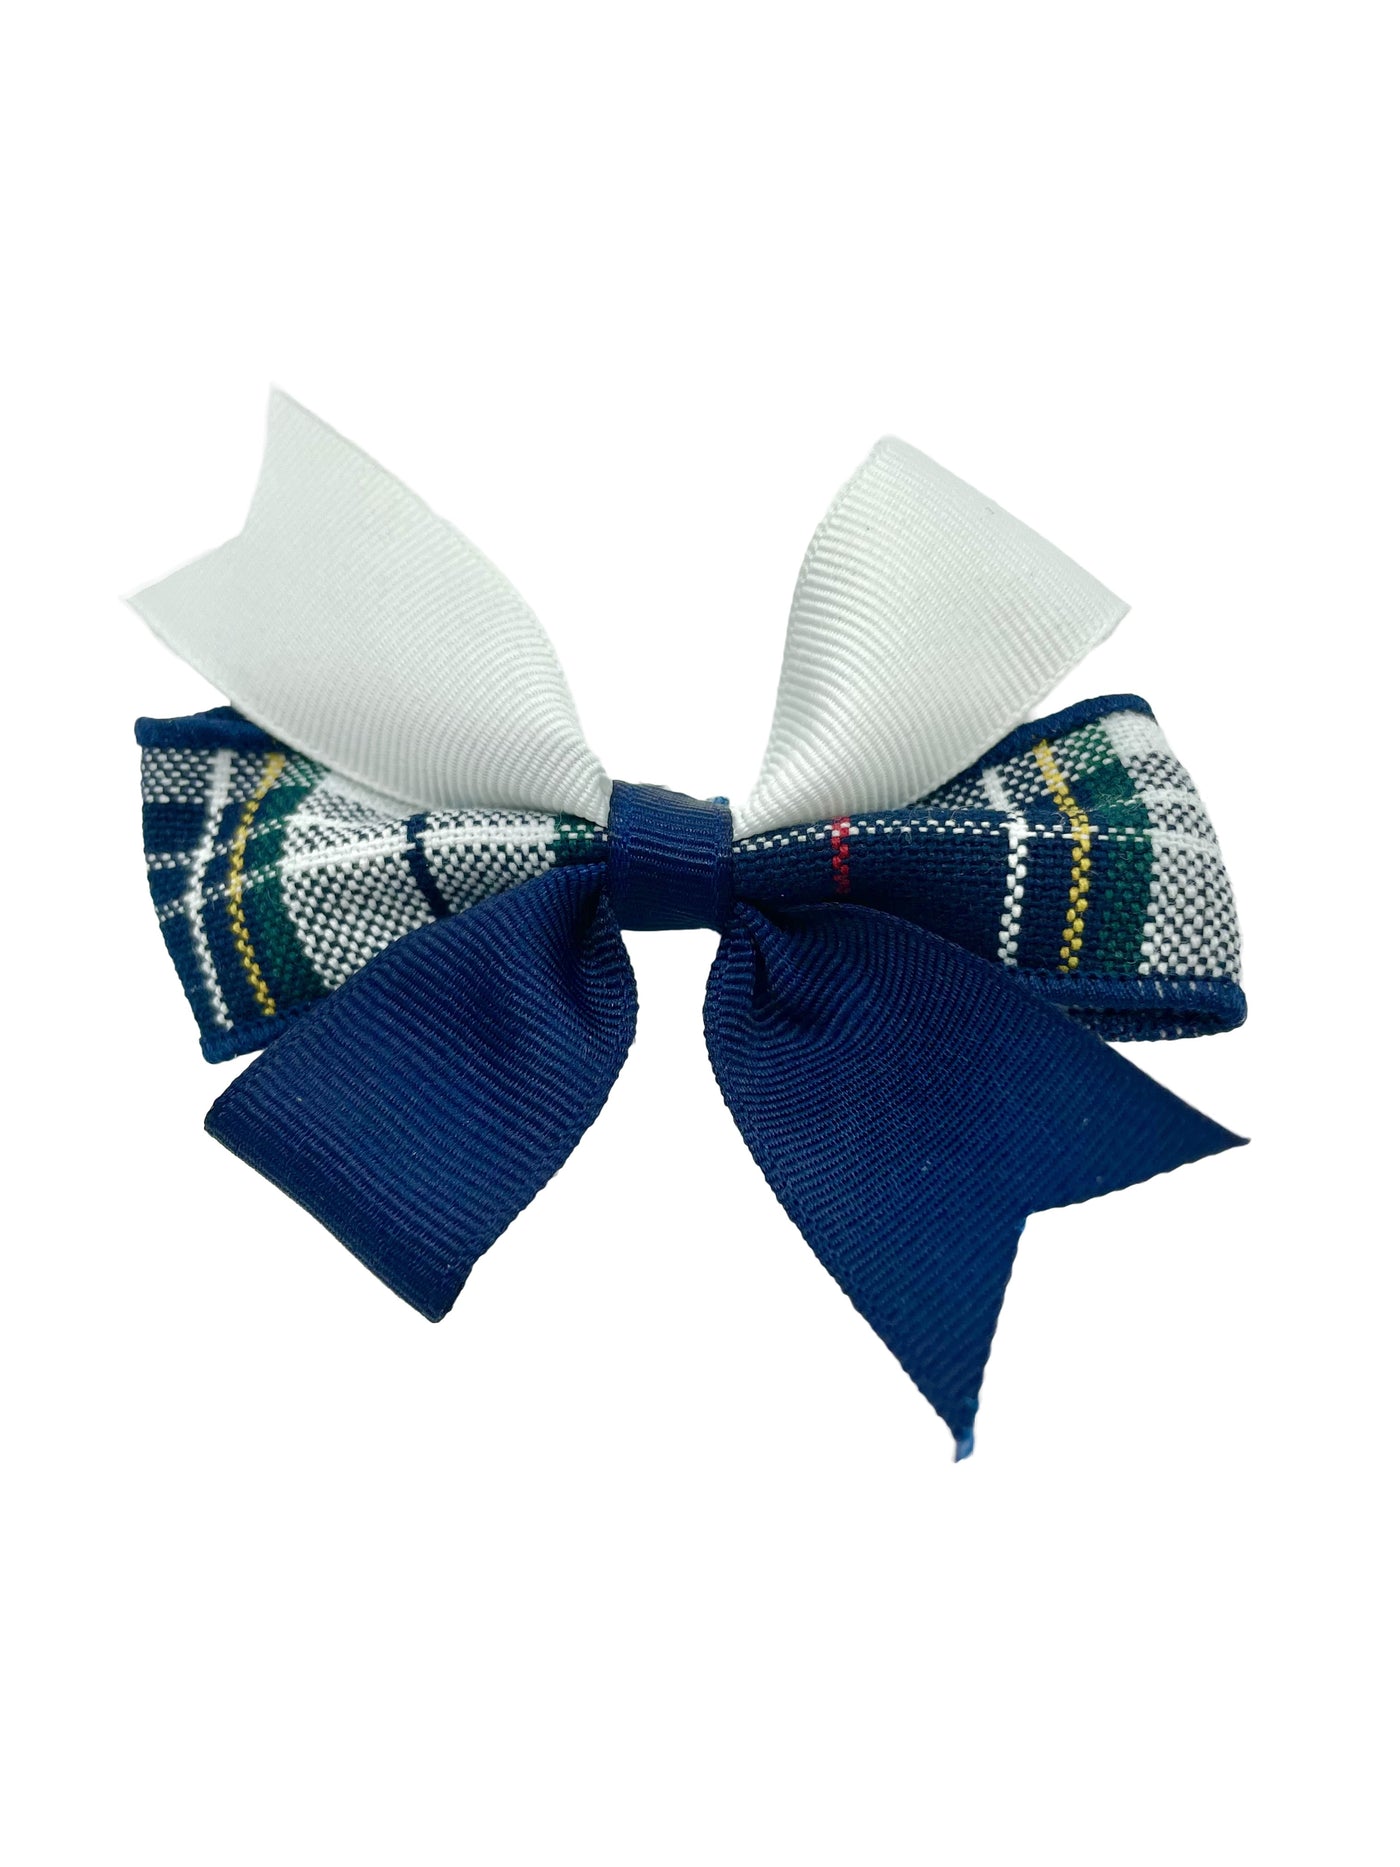 SMS bows and scrunchiesmall clip bow